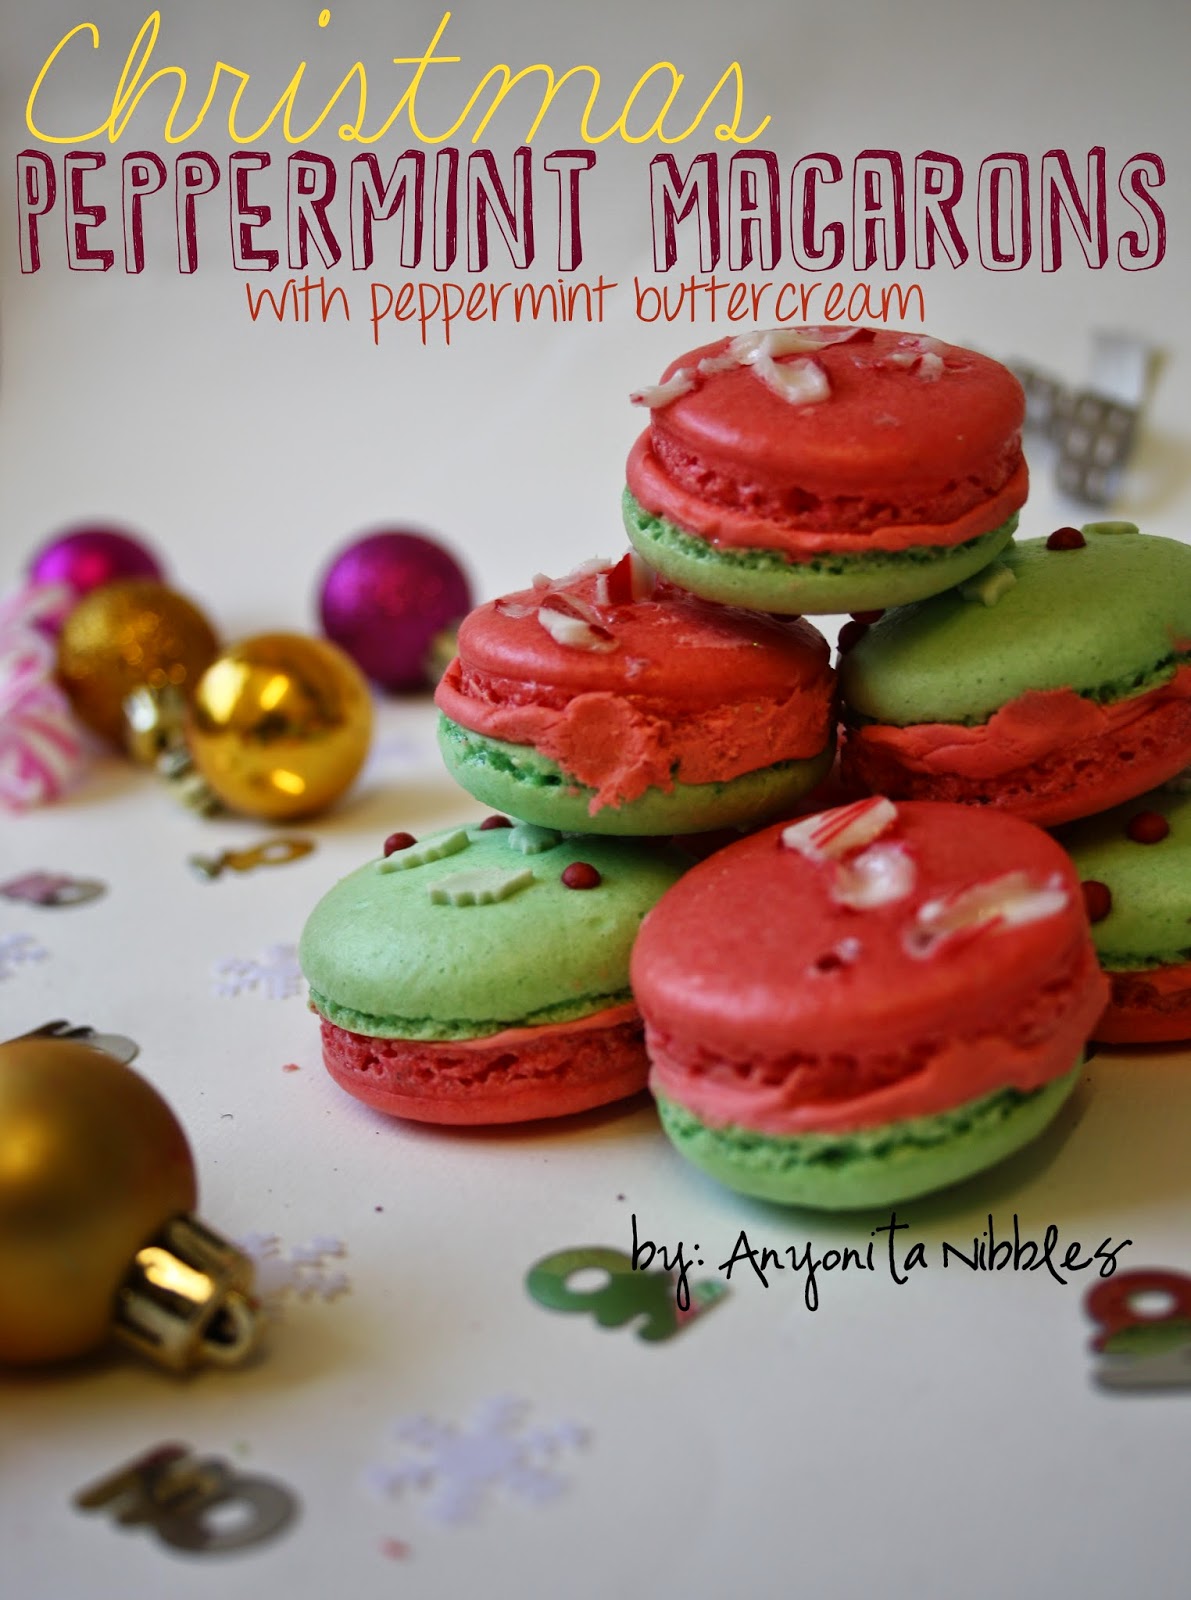 8 Last Minute Christmas Treats: Christmas Peppermint Macarons from Anyonita-nibbles.co.uk